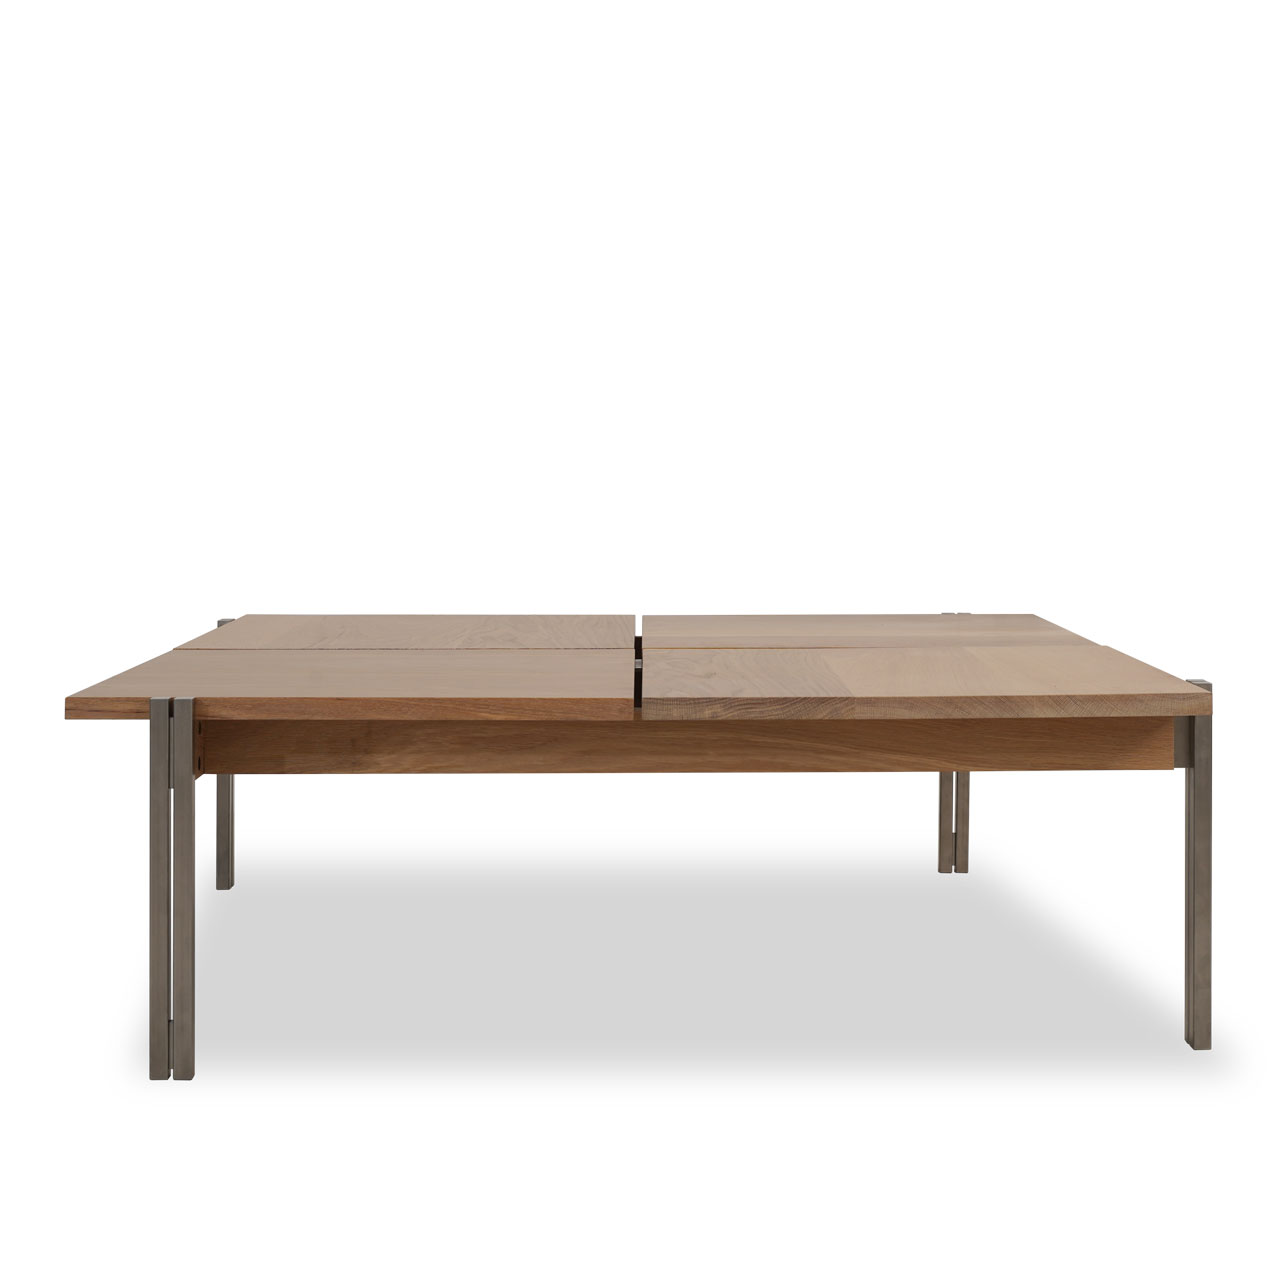 SUITE 2.0 Low table